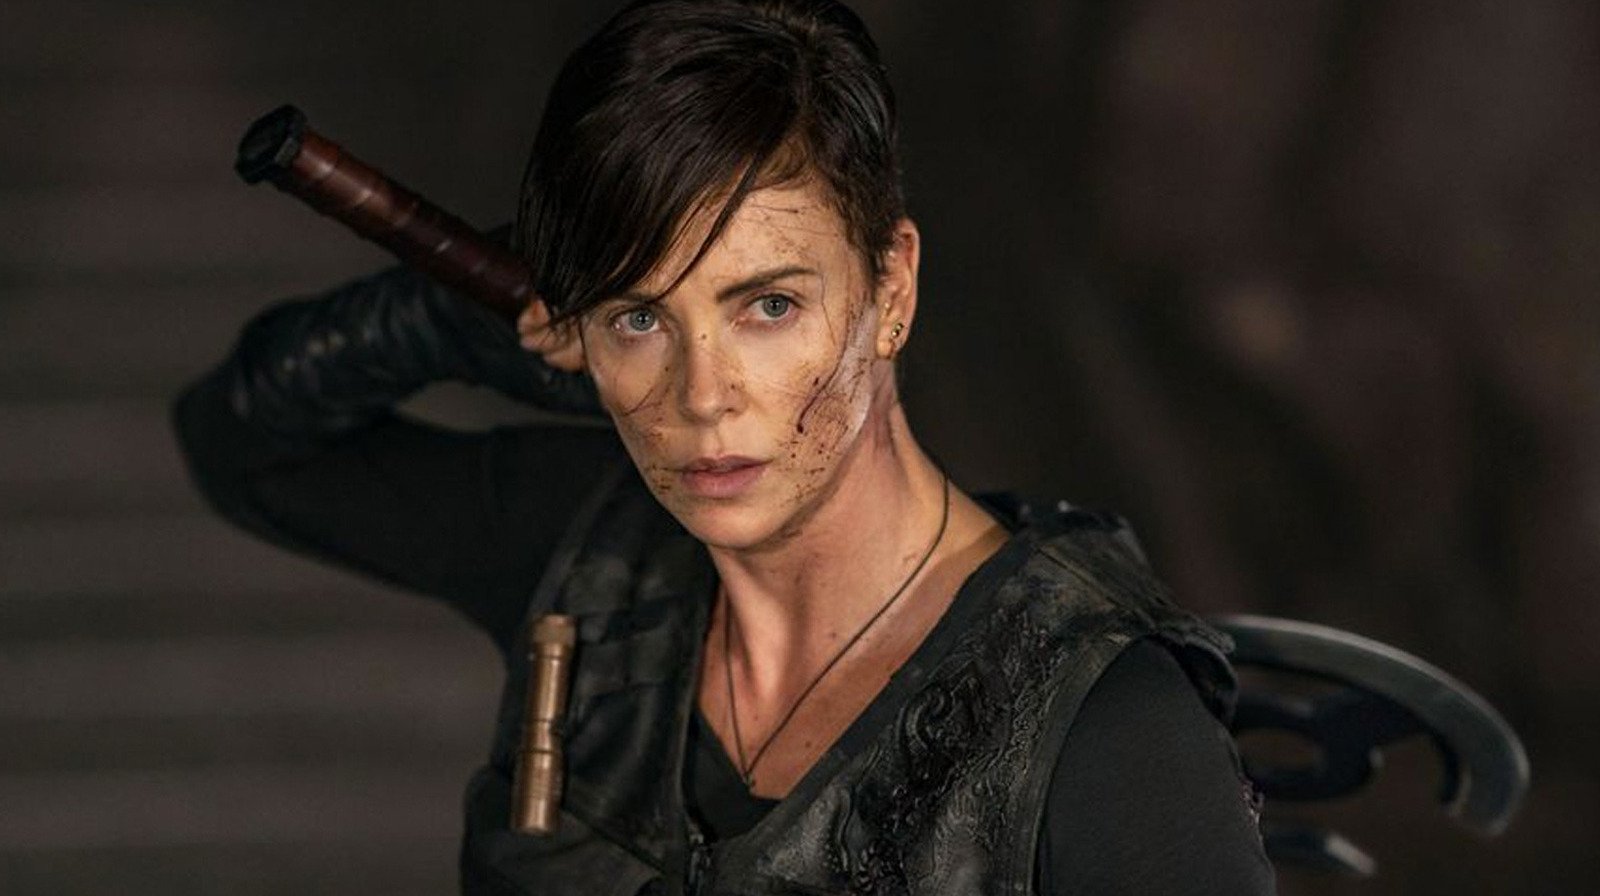 This Actor Inspired Charlize Theron To Do Her Own Stunts - /Film